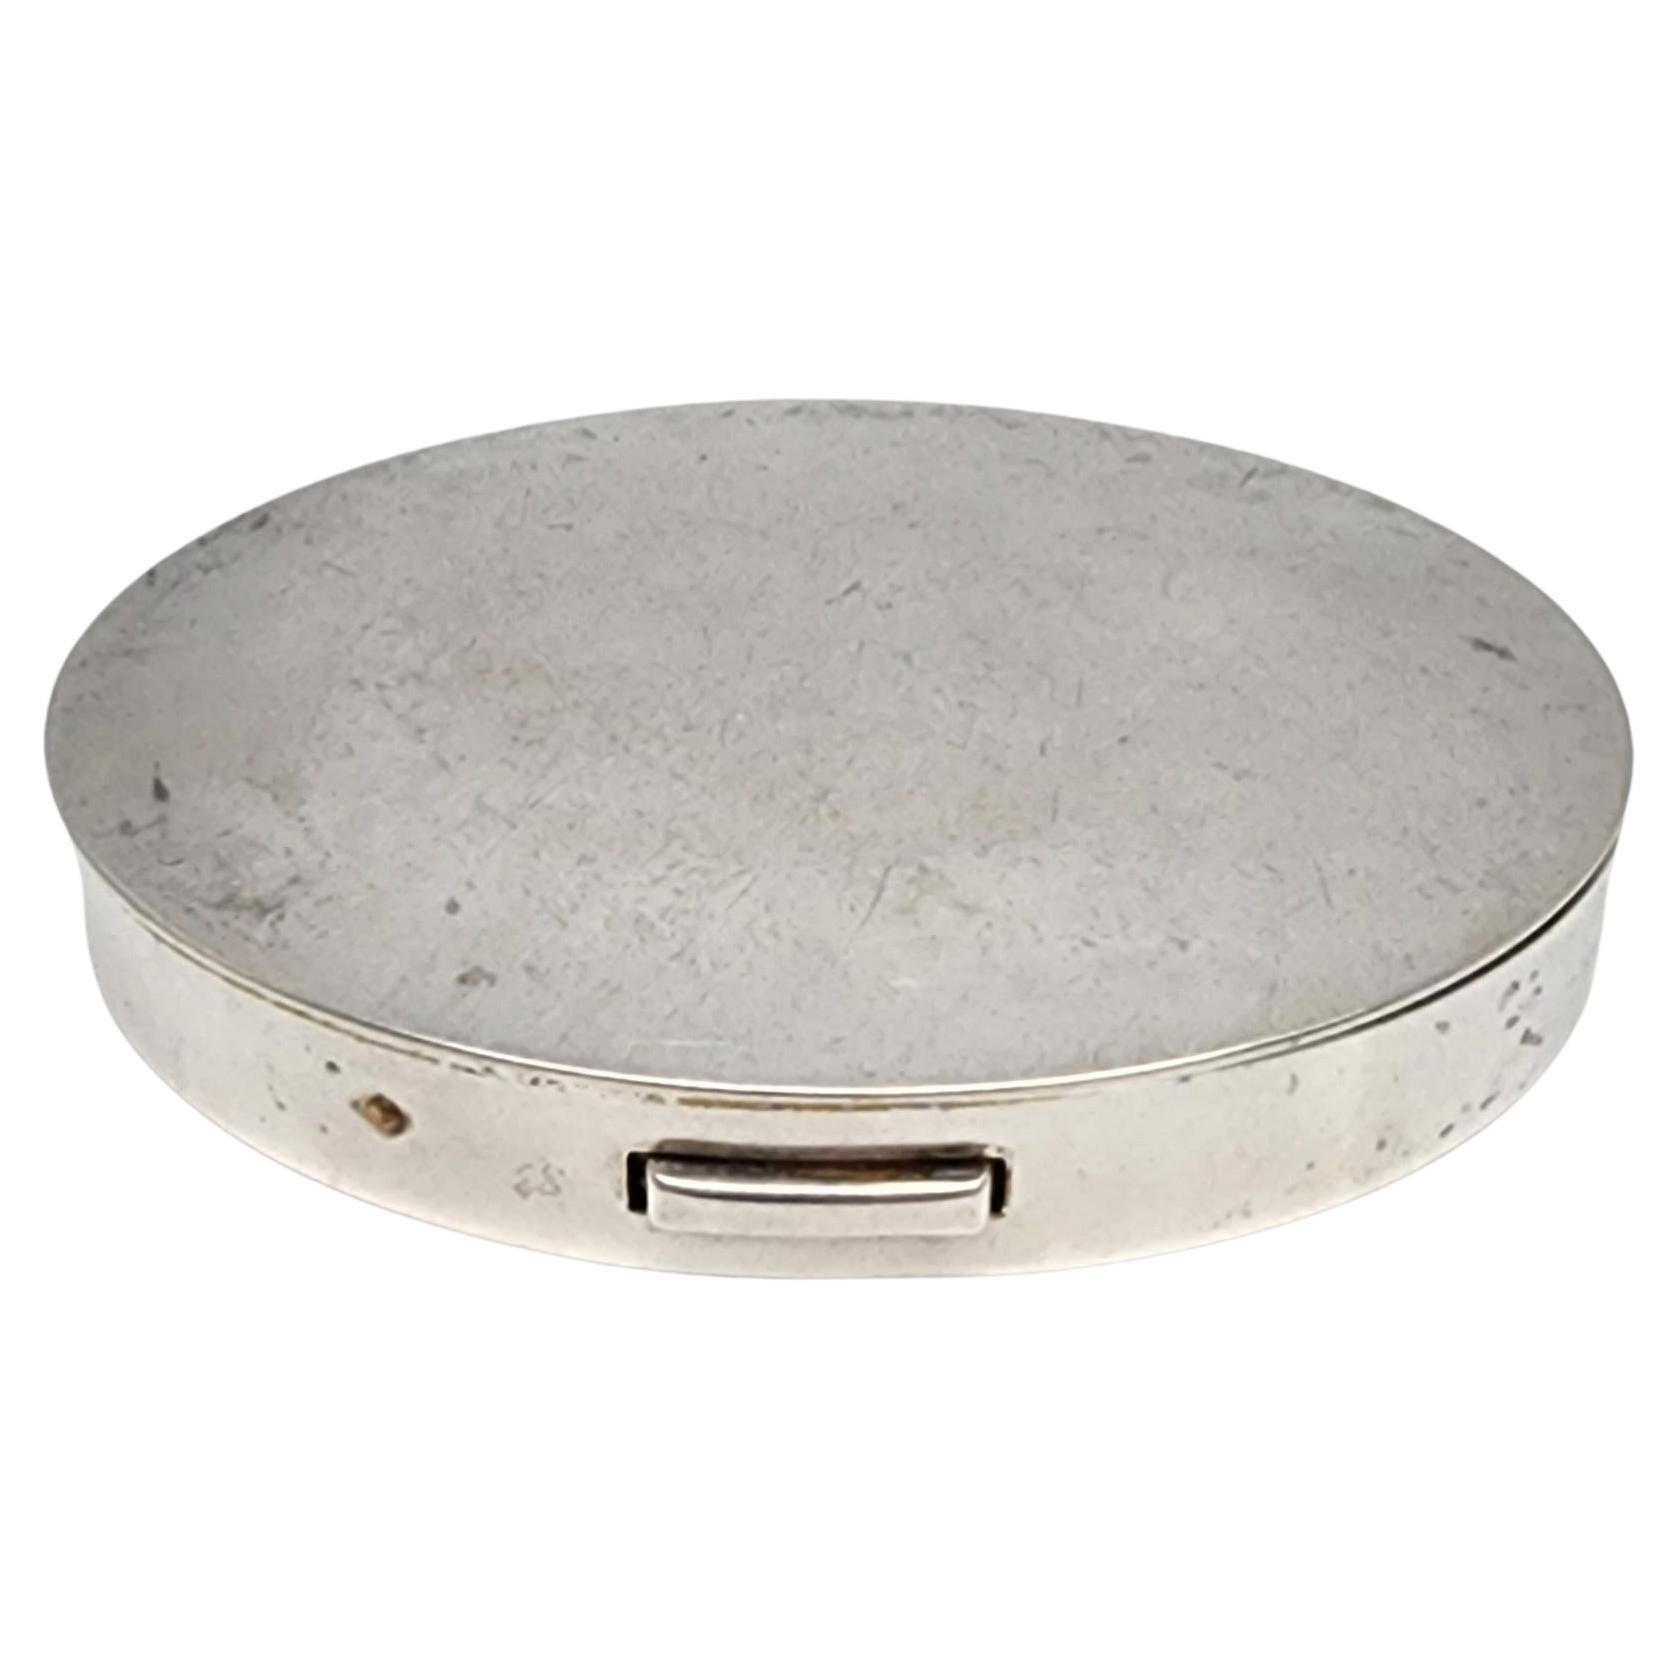 Dunhill Sterling Silver Oval Mirror Compact #16887